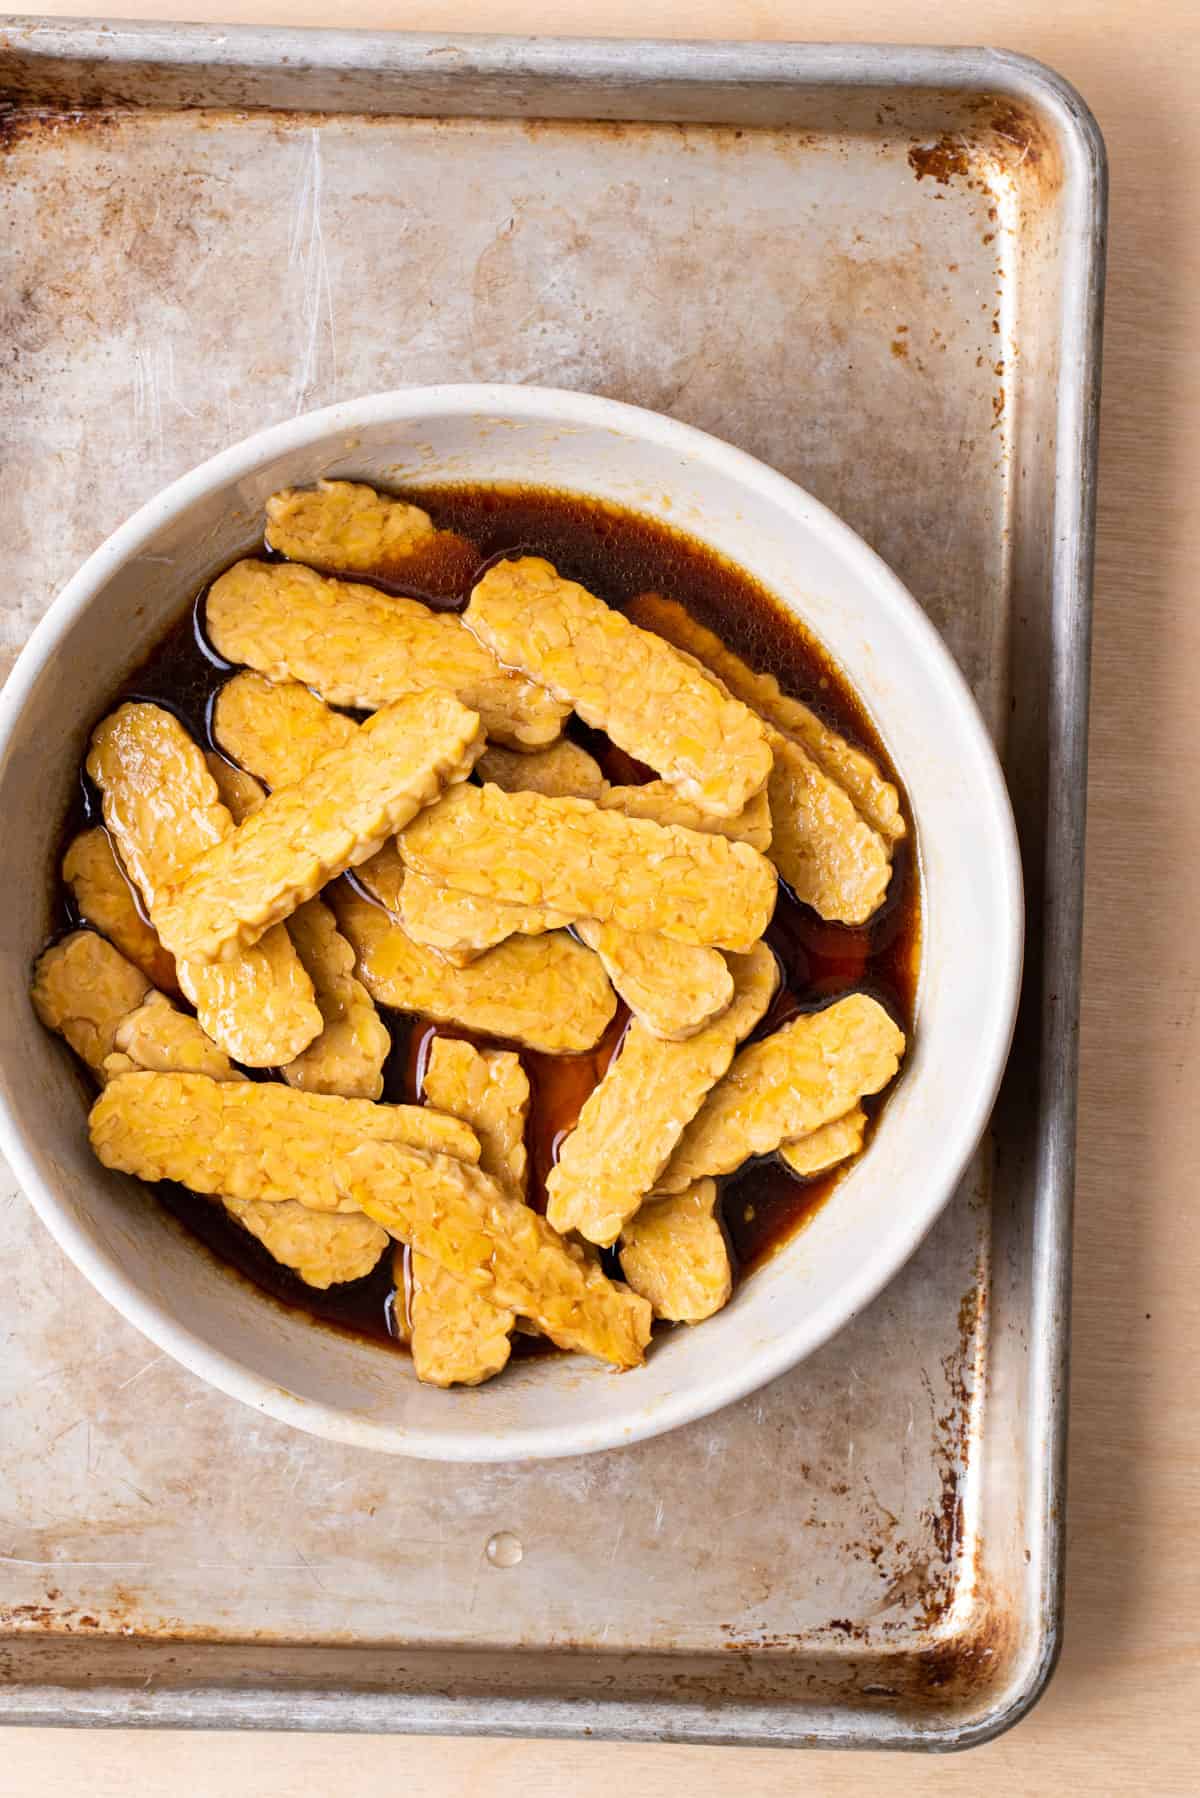 Tempeh slices marinating in a soy sauce-maple syrup mixture.